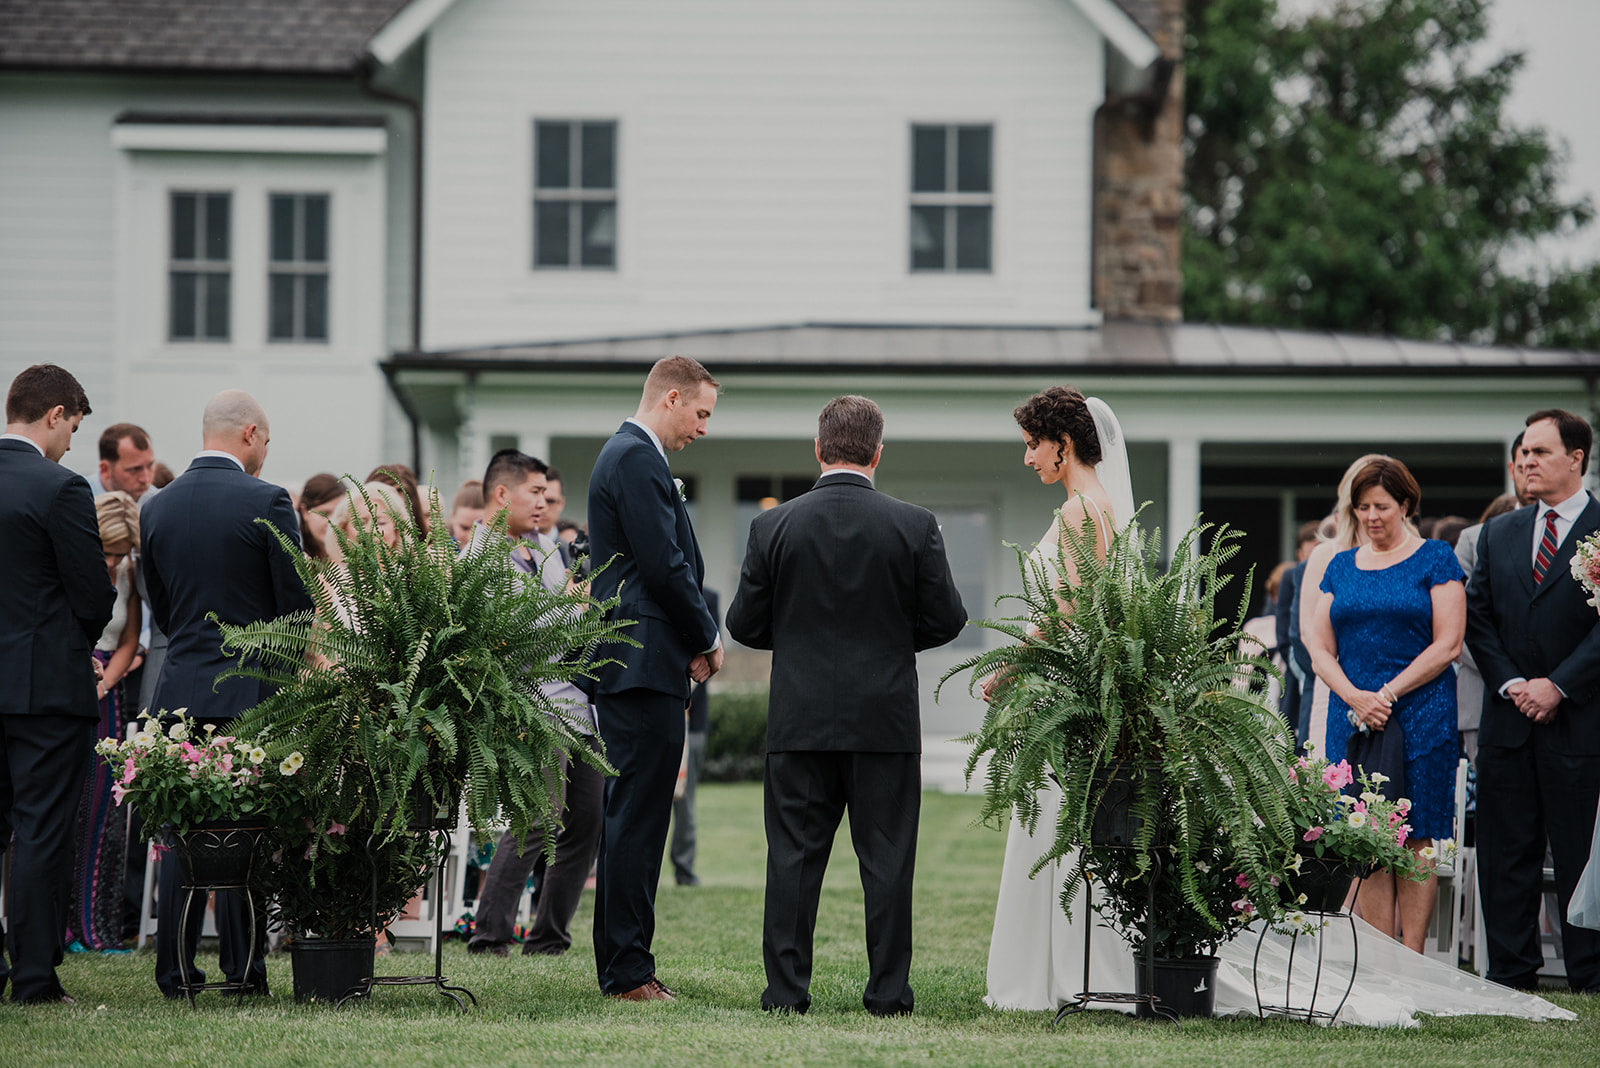 A bride and a groom get married between two ferns during their outdoor wedding ceremony at Blue Hill Farm in Waterford, VA.